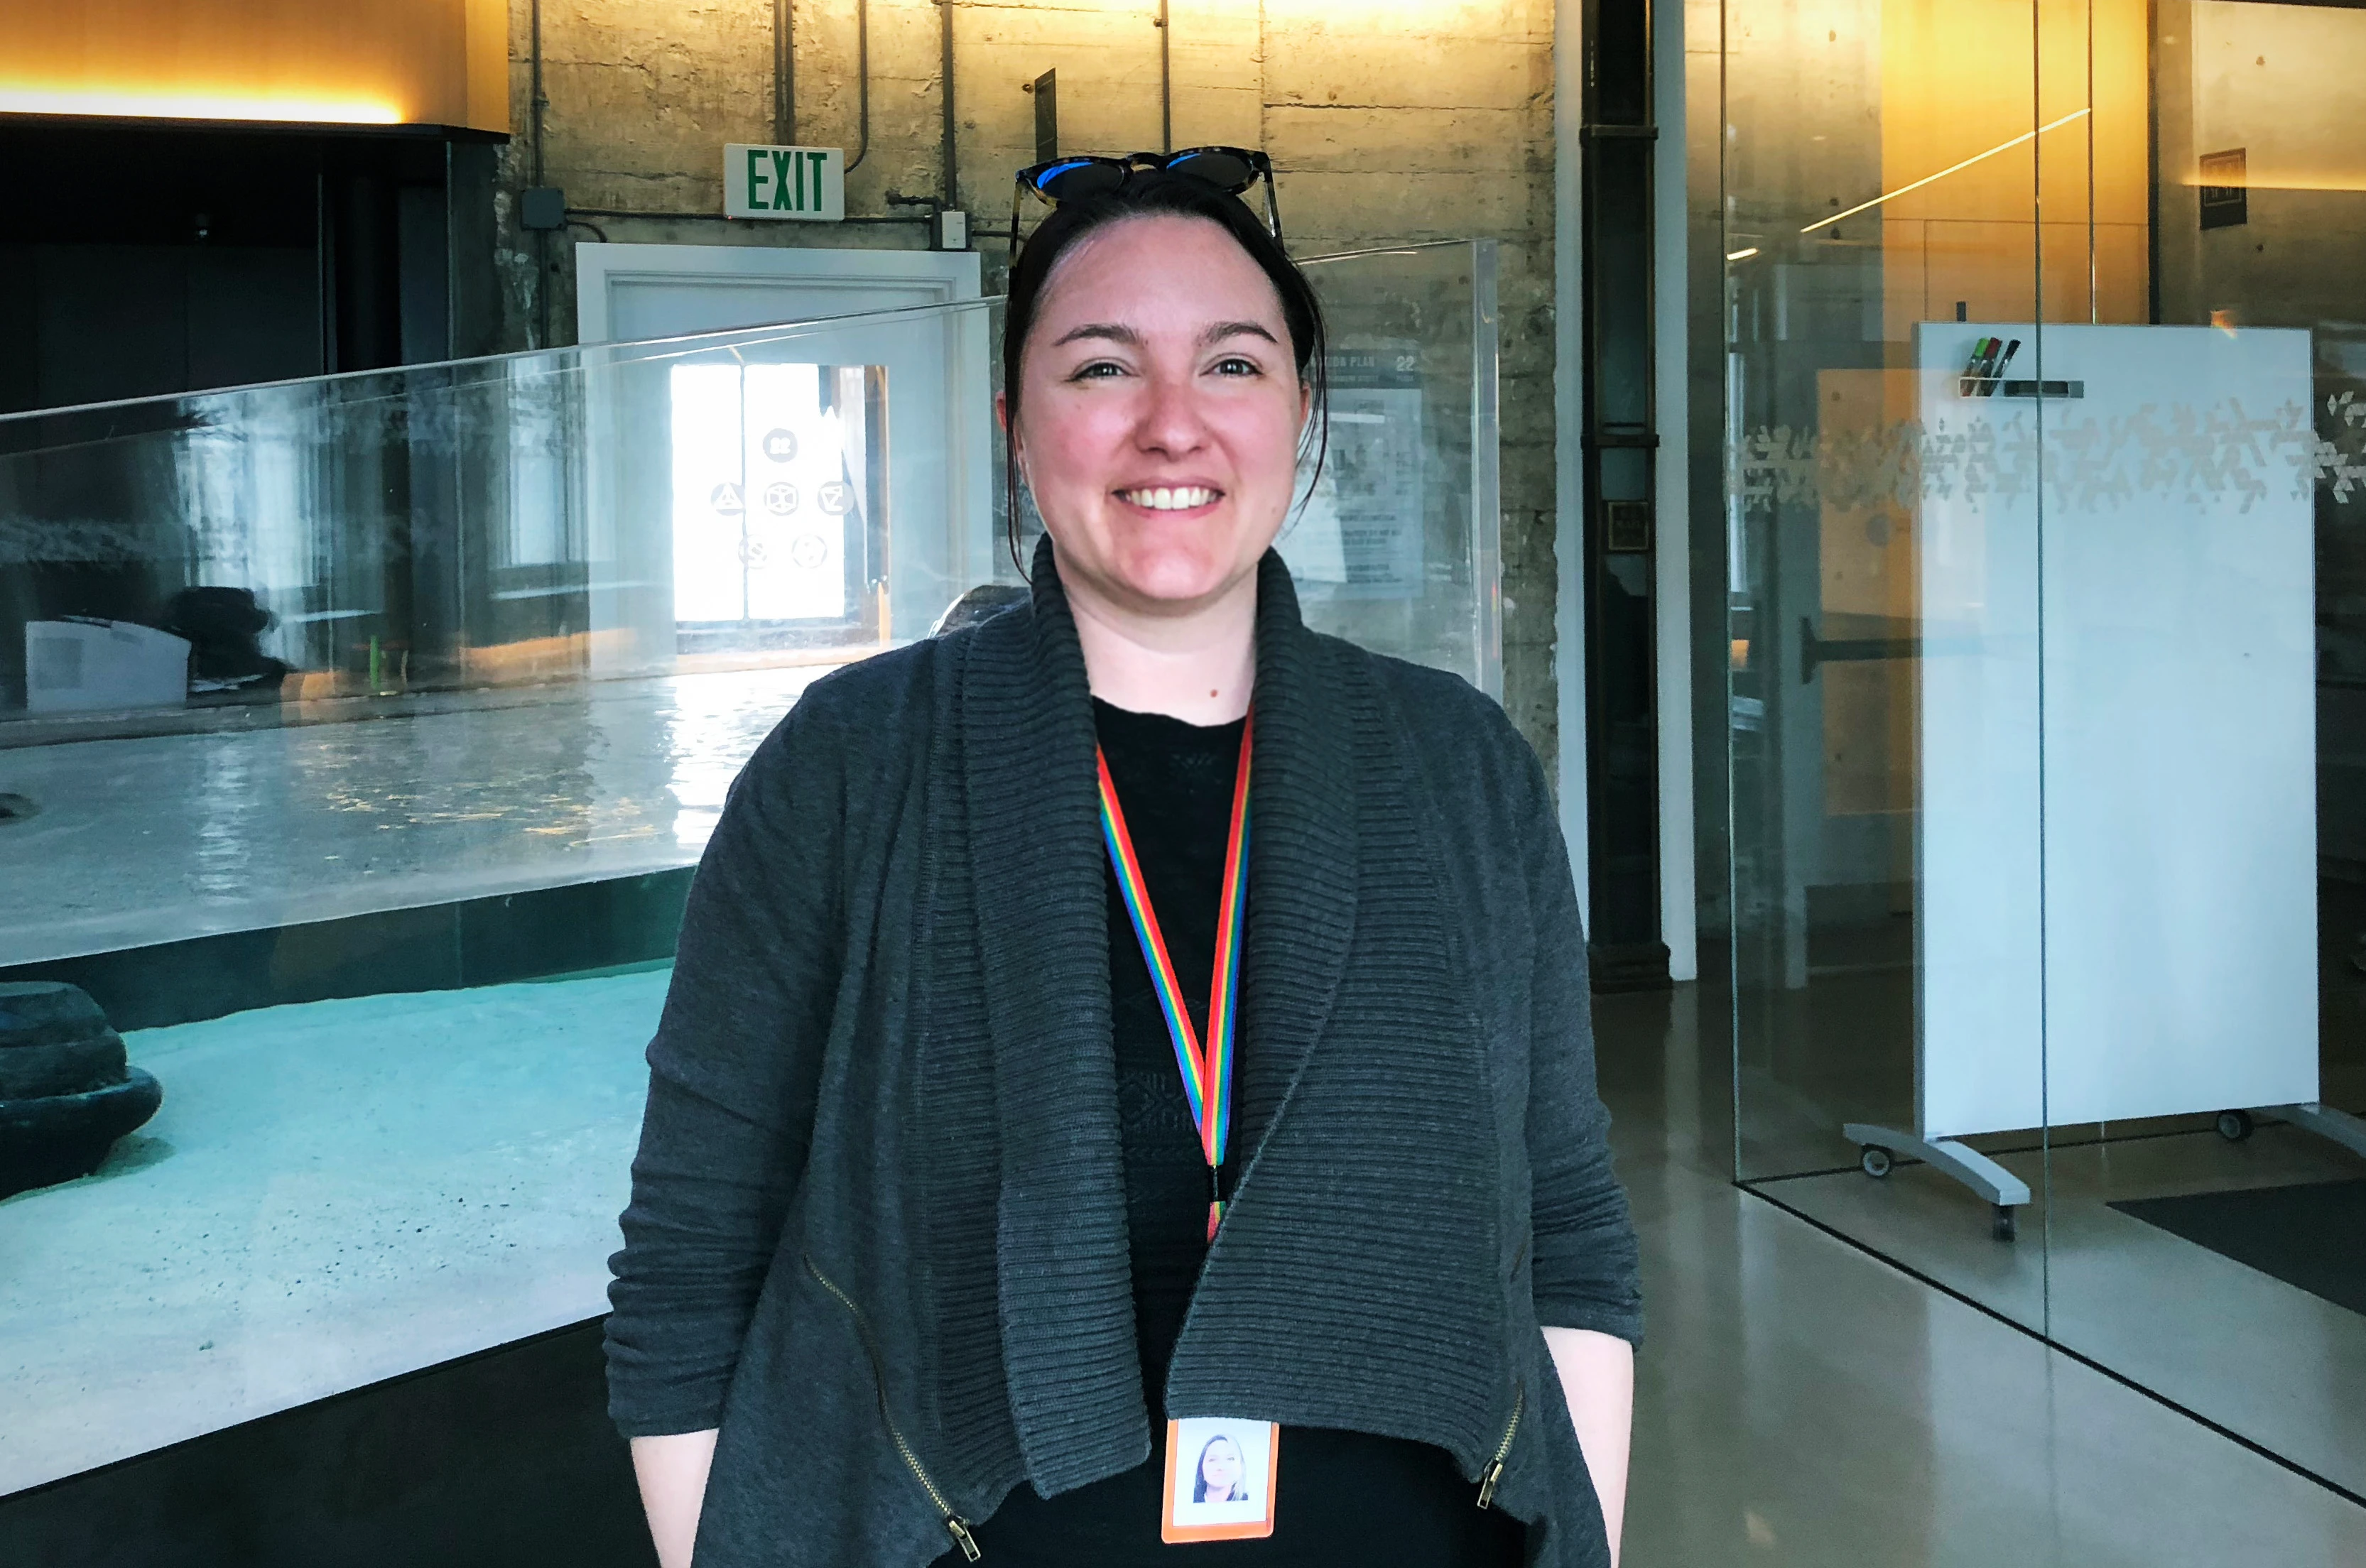 Stephanie Stattel is a Senior Software Engineer for the Application Toolkits team at Bloomberg and is a San Francisco Chapter Co-lead of Bloomberg Women in Technology (BWIT)